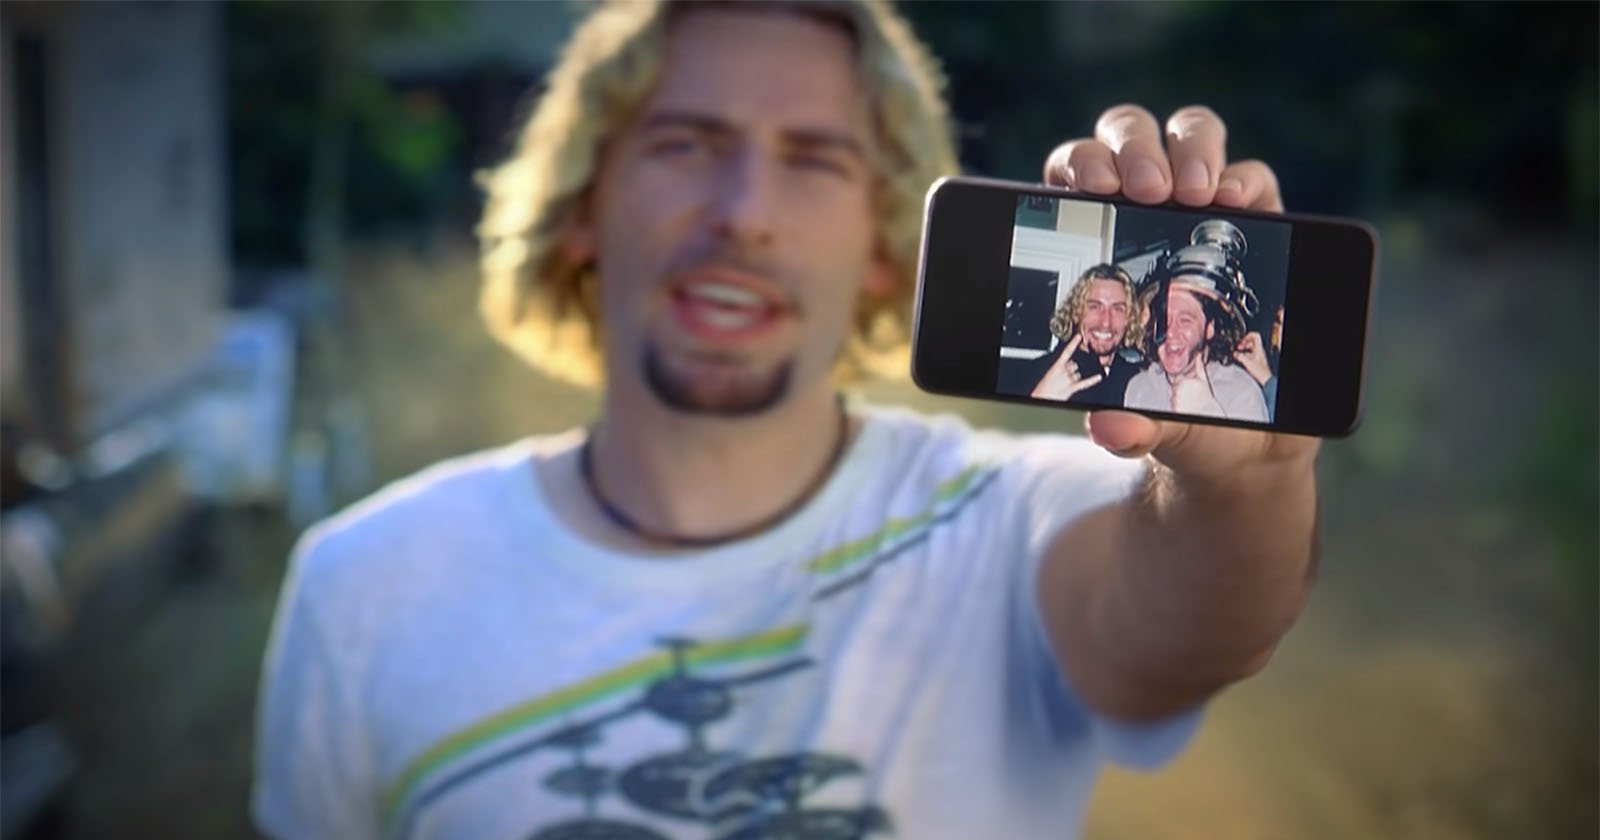 Nickelback did a parody of the song ‘Photograph’ for Google Photos